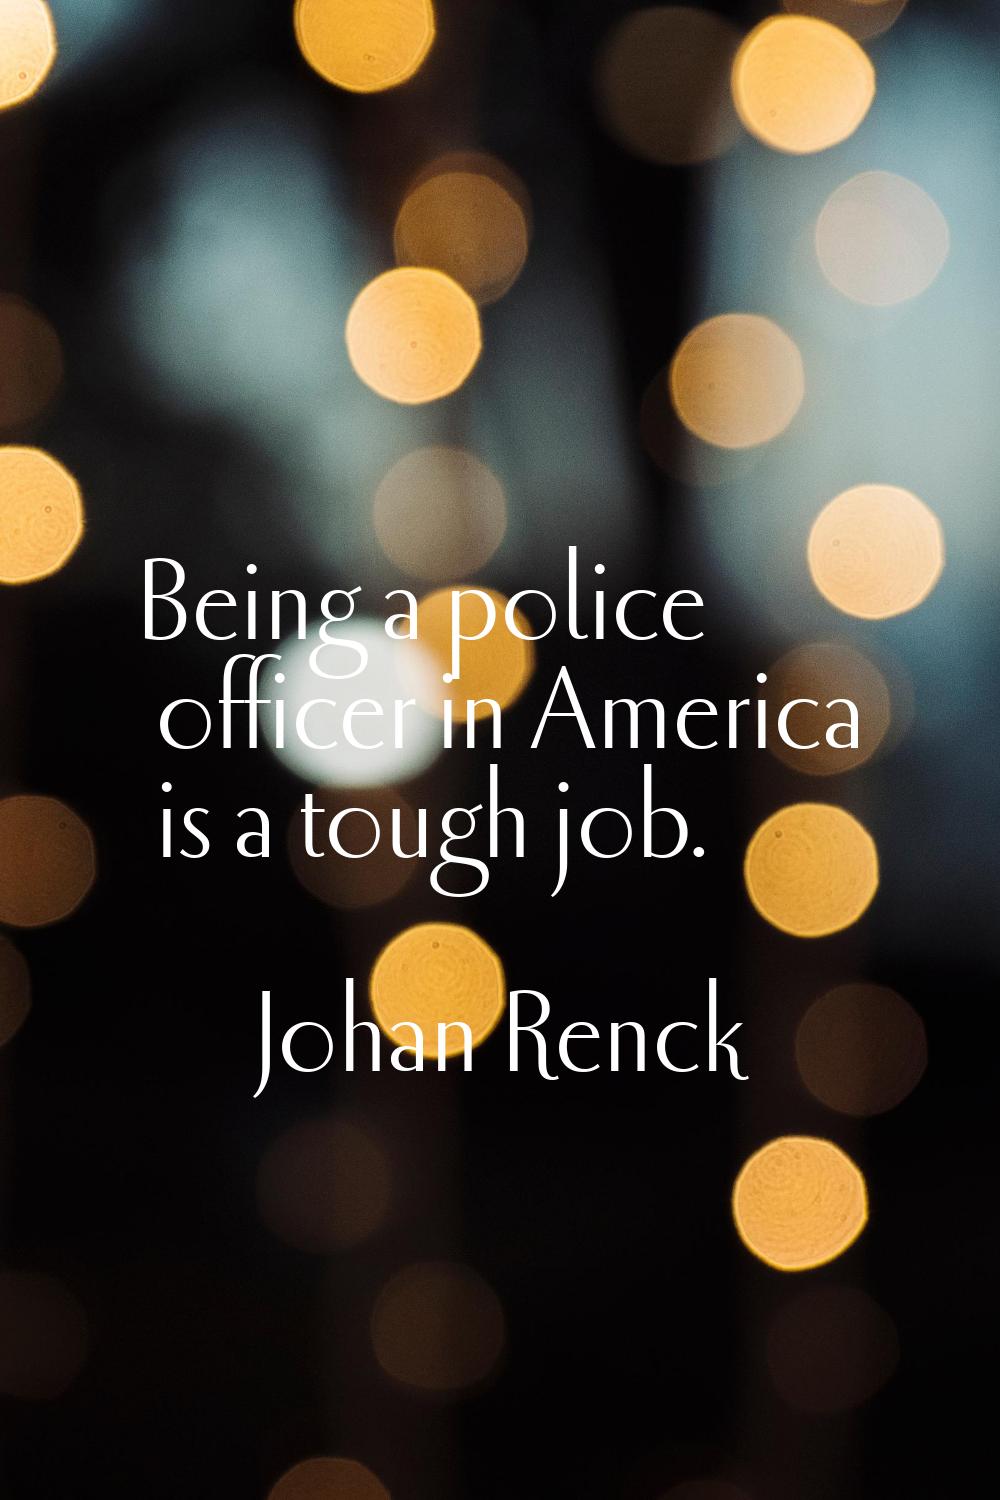 Being a police officer in America is a tough job.